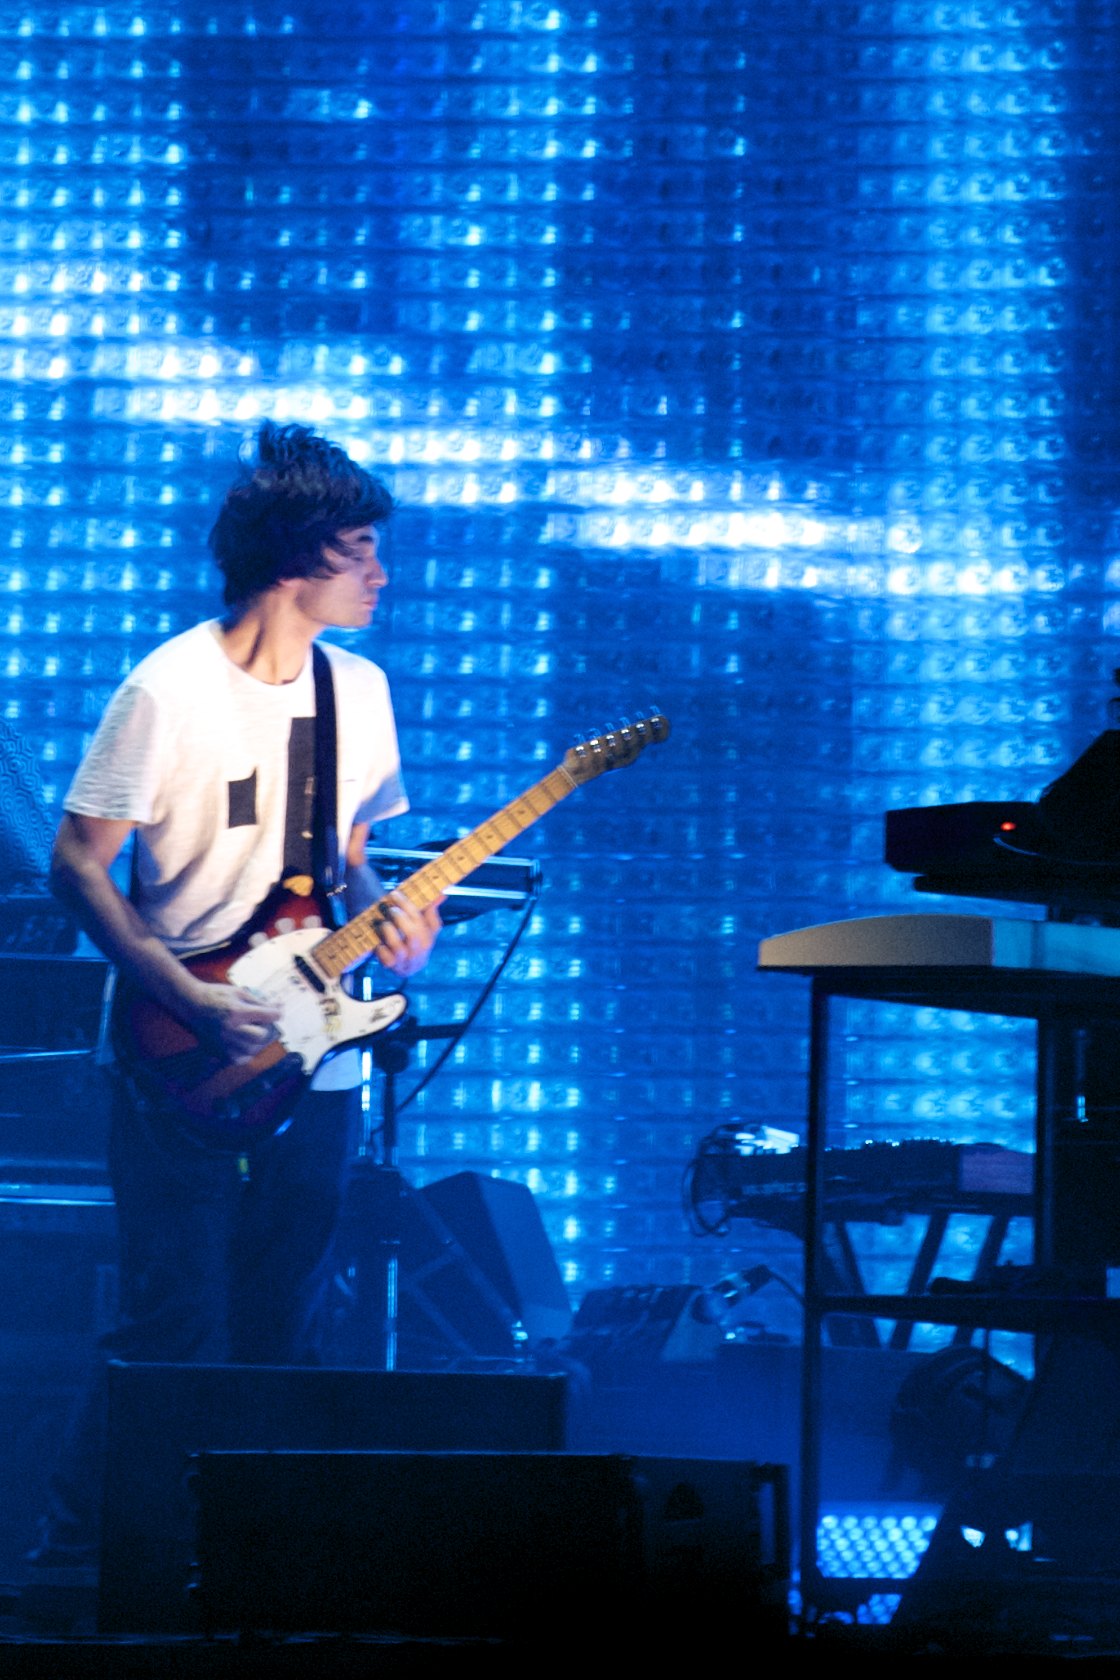 two young men performing on stage with keyboard and piano